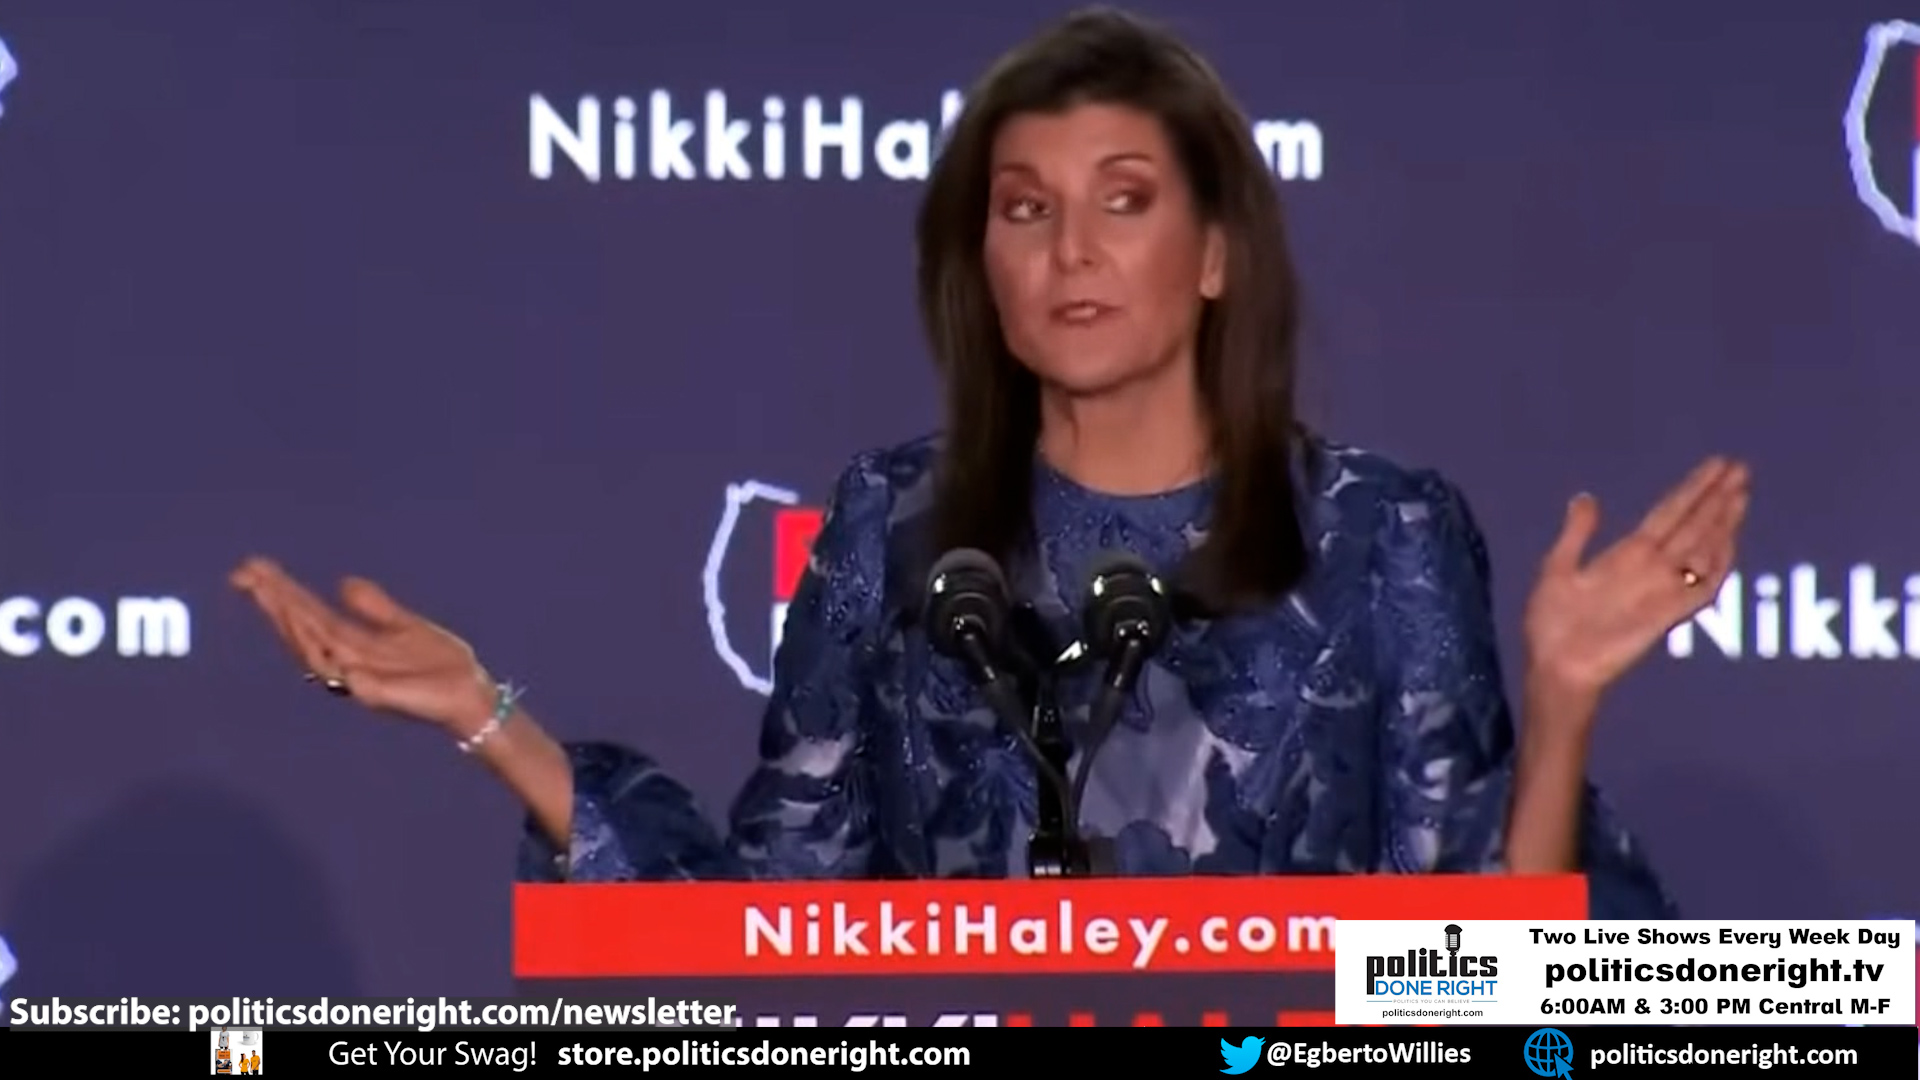 WATCH: Nikki Haley prophetic as she predicted a Kamala Harris candidacy and first woman presidency.